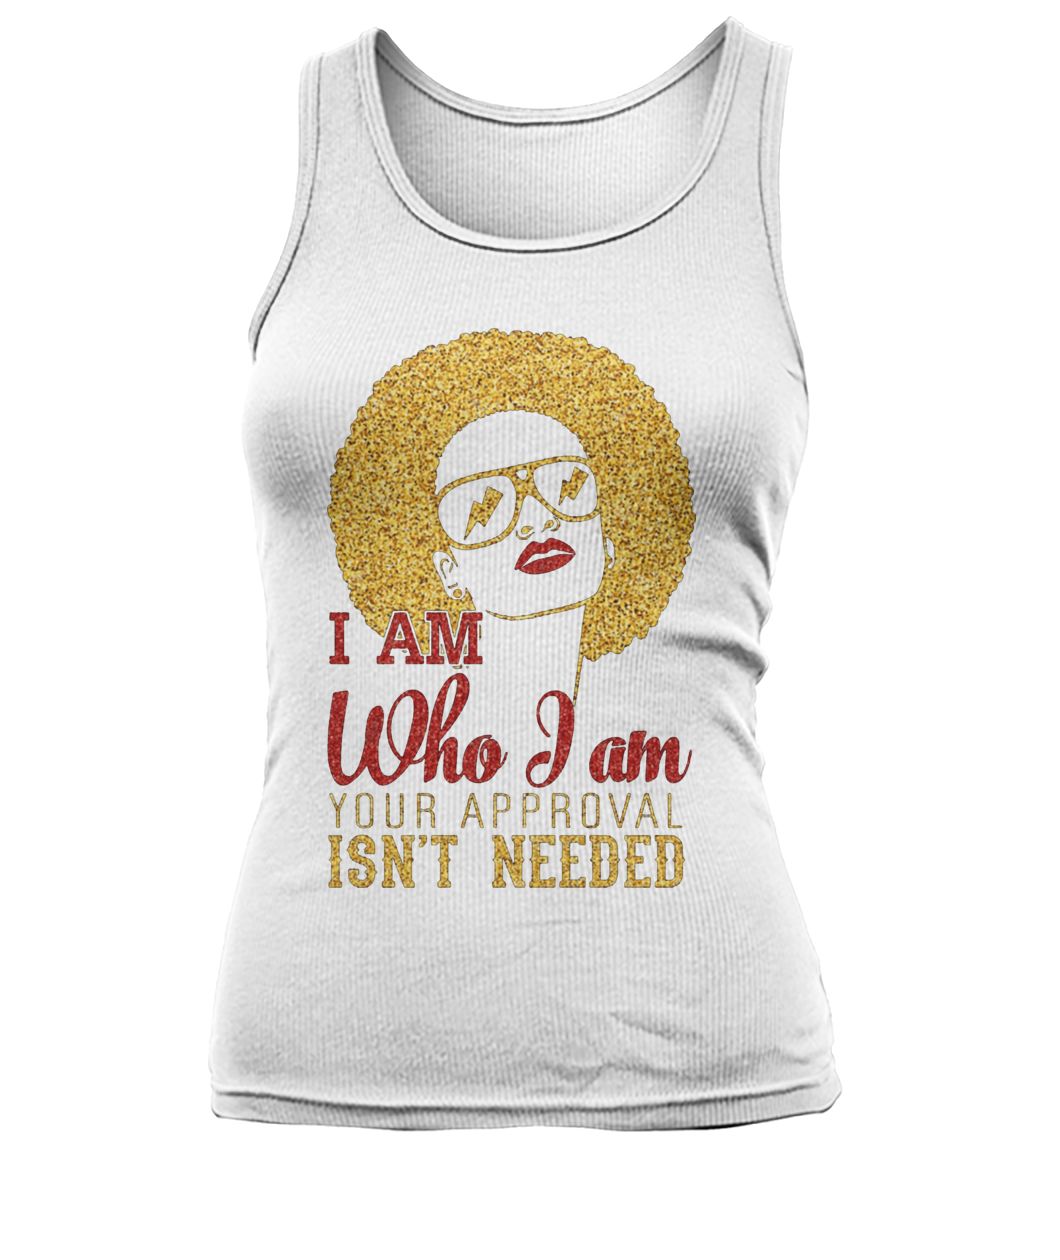 Black woman I am who I am your approval isn't needed women's tank top